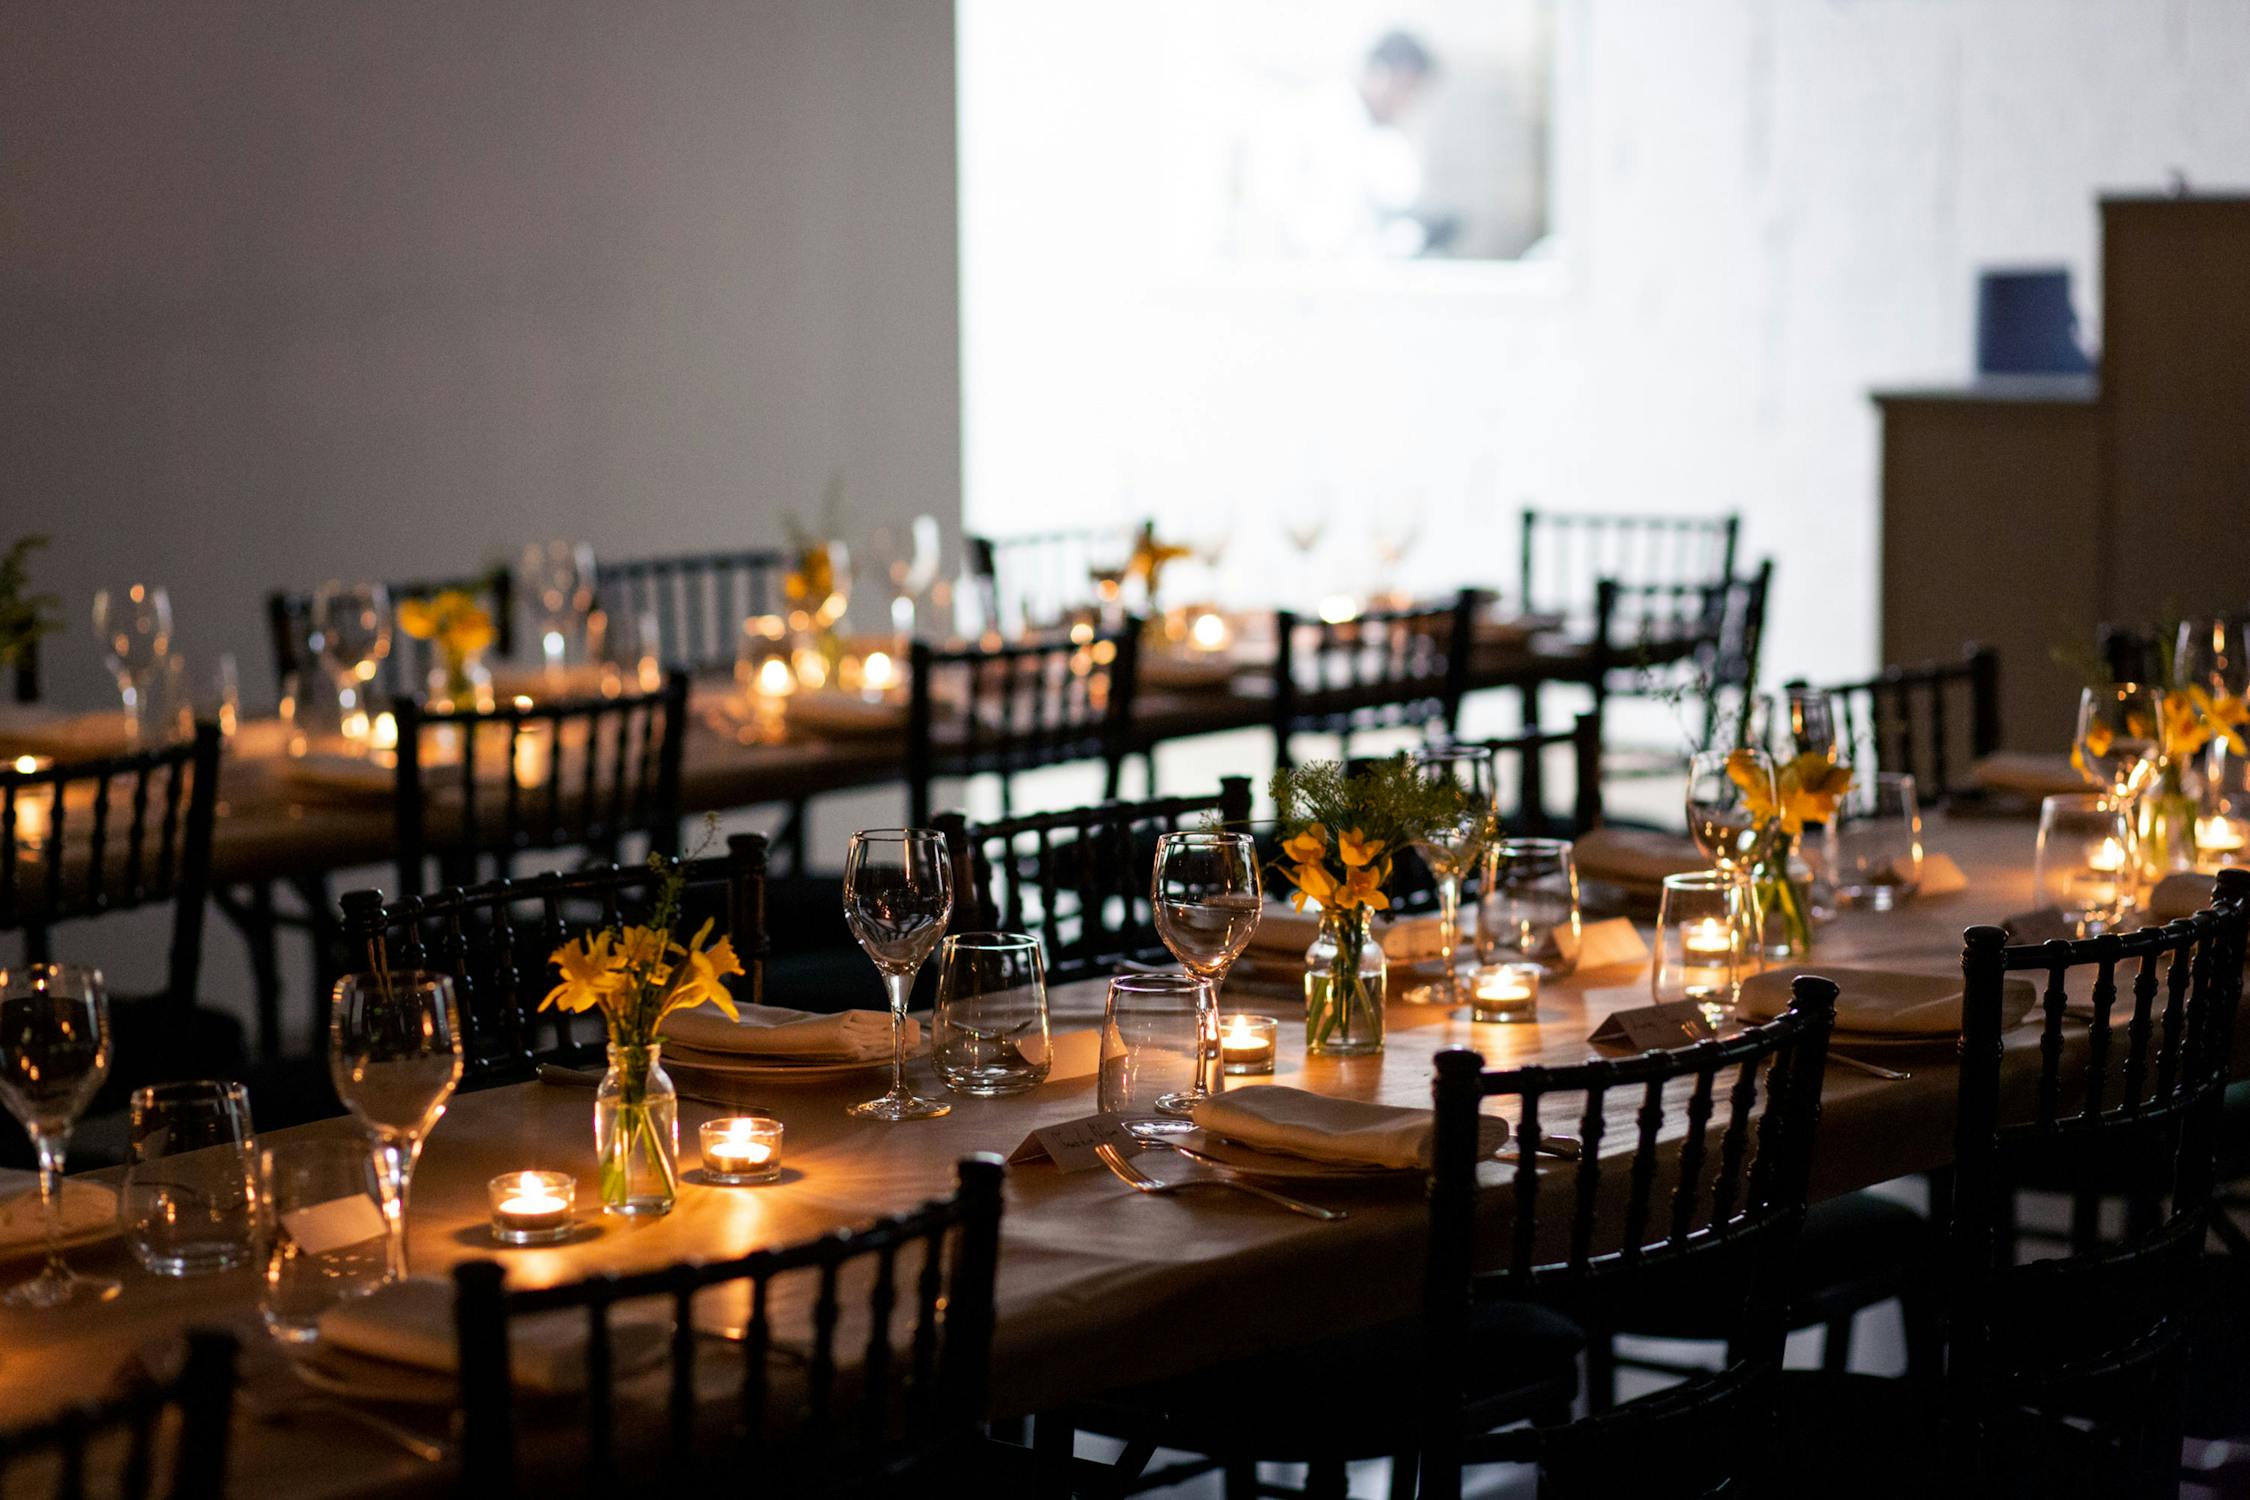 A soft focus photograph of two long tables set for dinner. The room is dark and the tables are light by small candles.